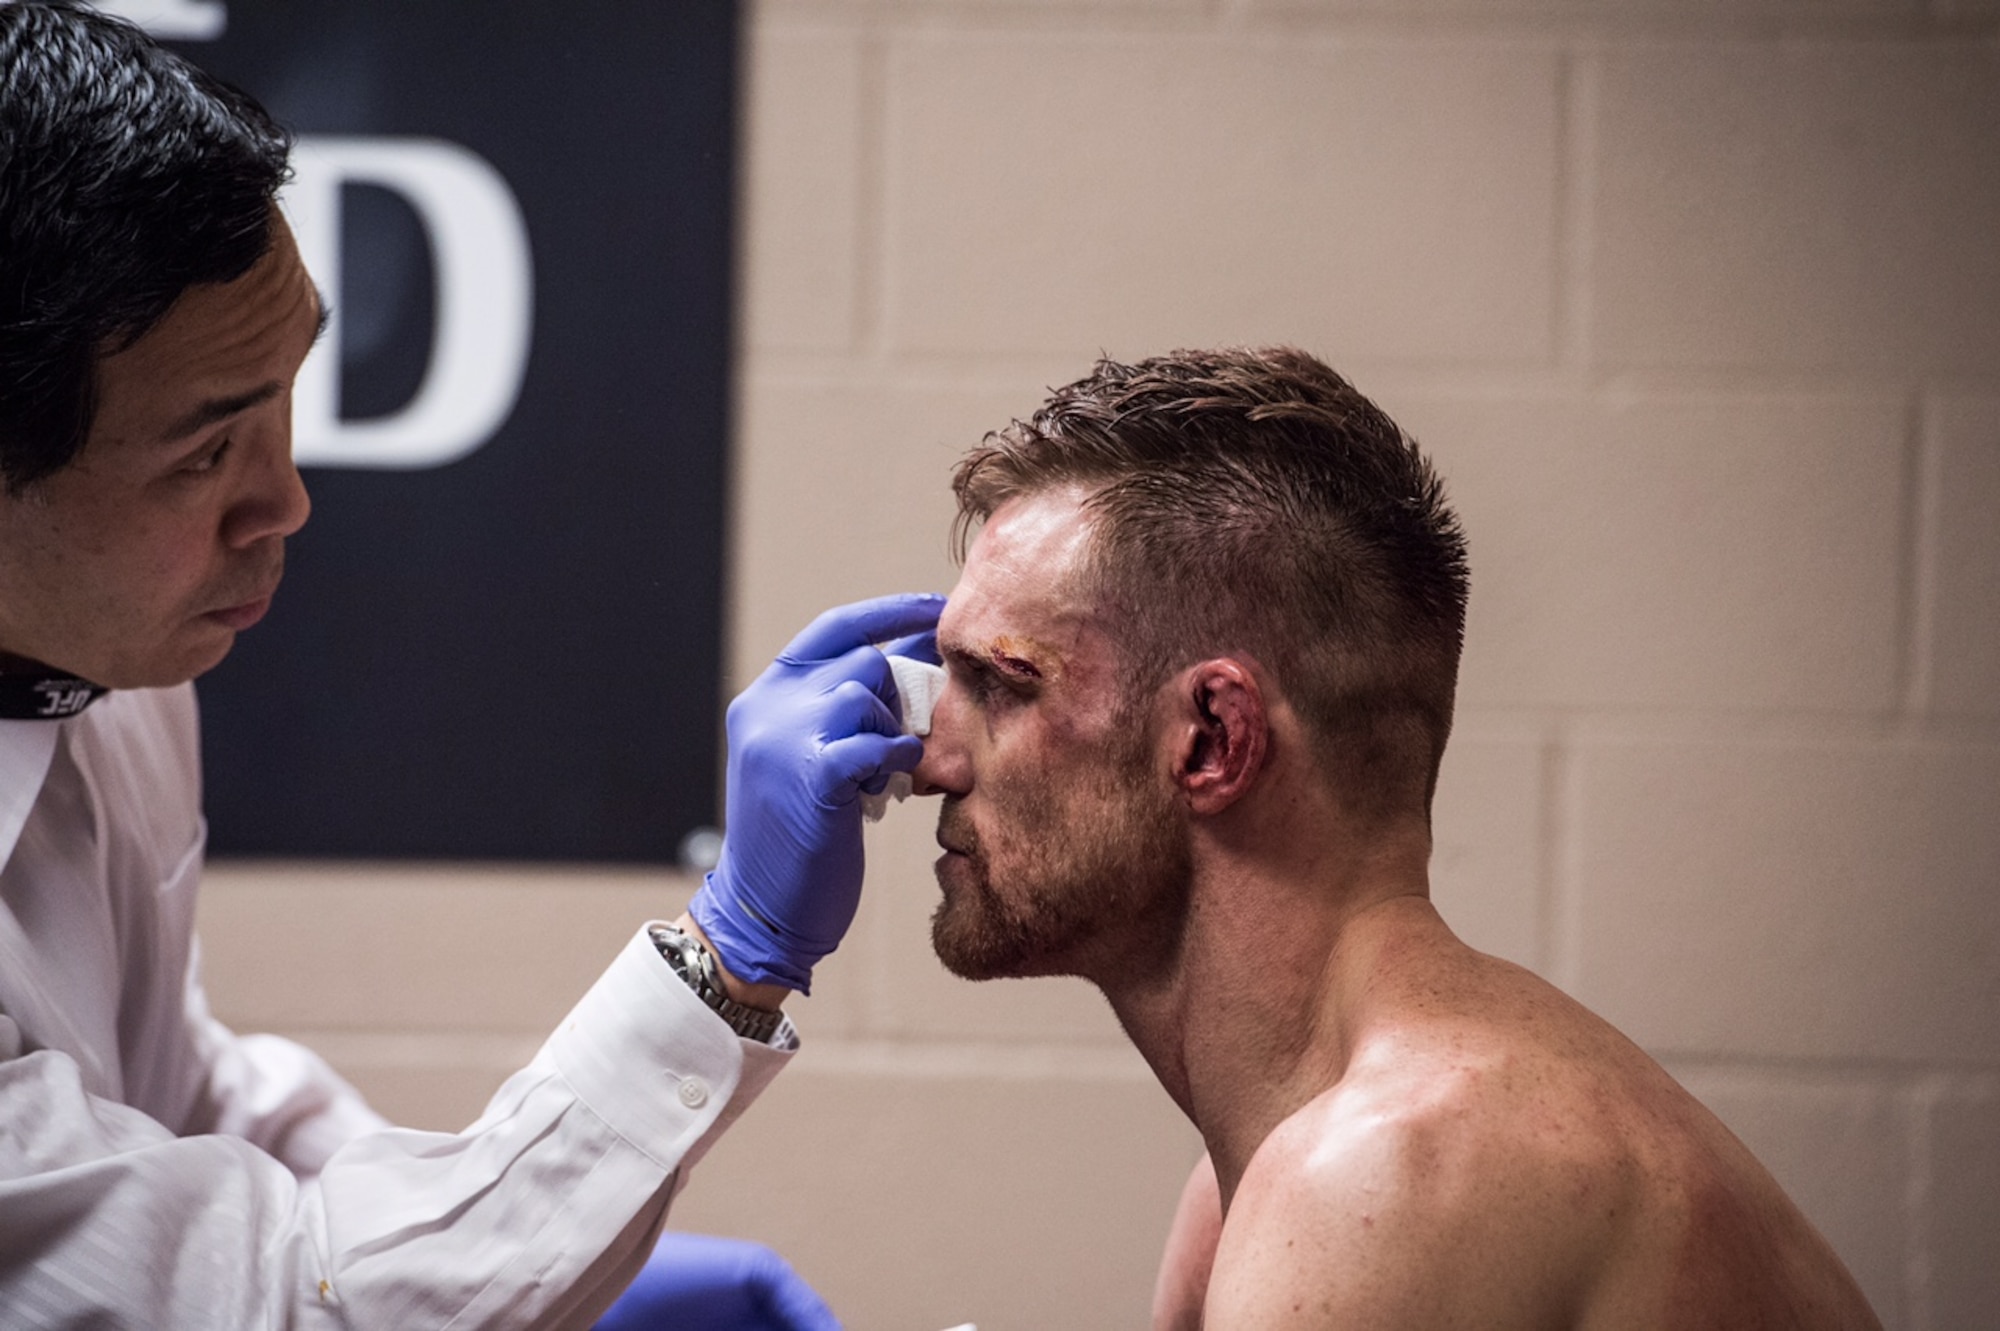 Dr. (Col.) Gregory Hsu, right, treats facial injuries on UFC fighters following their bouts in the octagon. Hsu is an ophthalmologist who also serves in the Air Force as the Individual Mobilization Augmentee to the Pacific Air Forces Surgeon General.